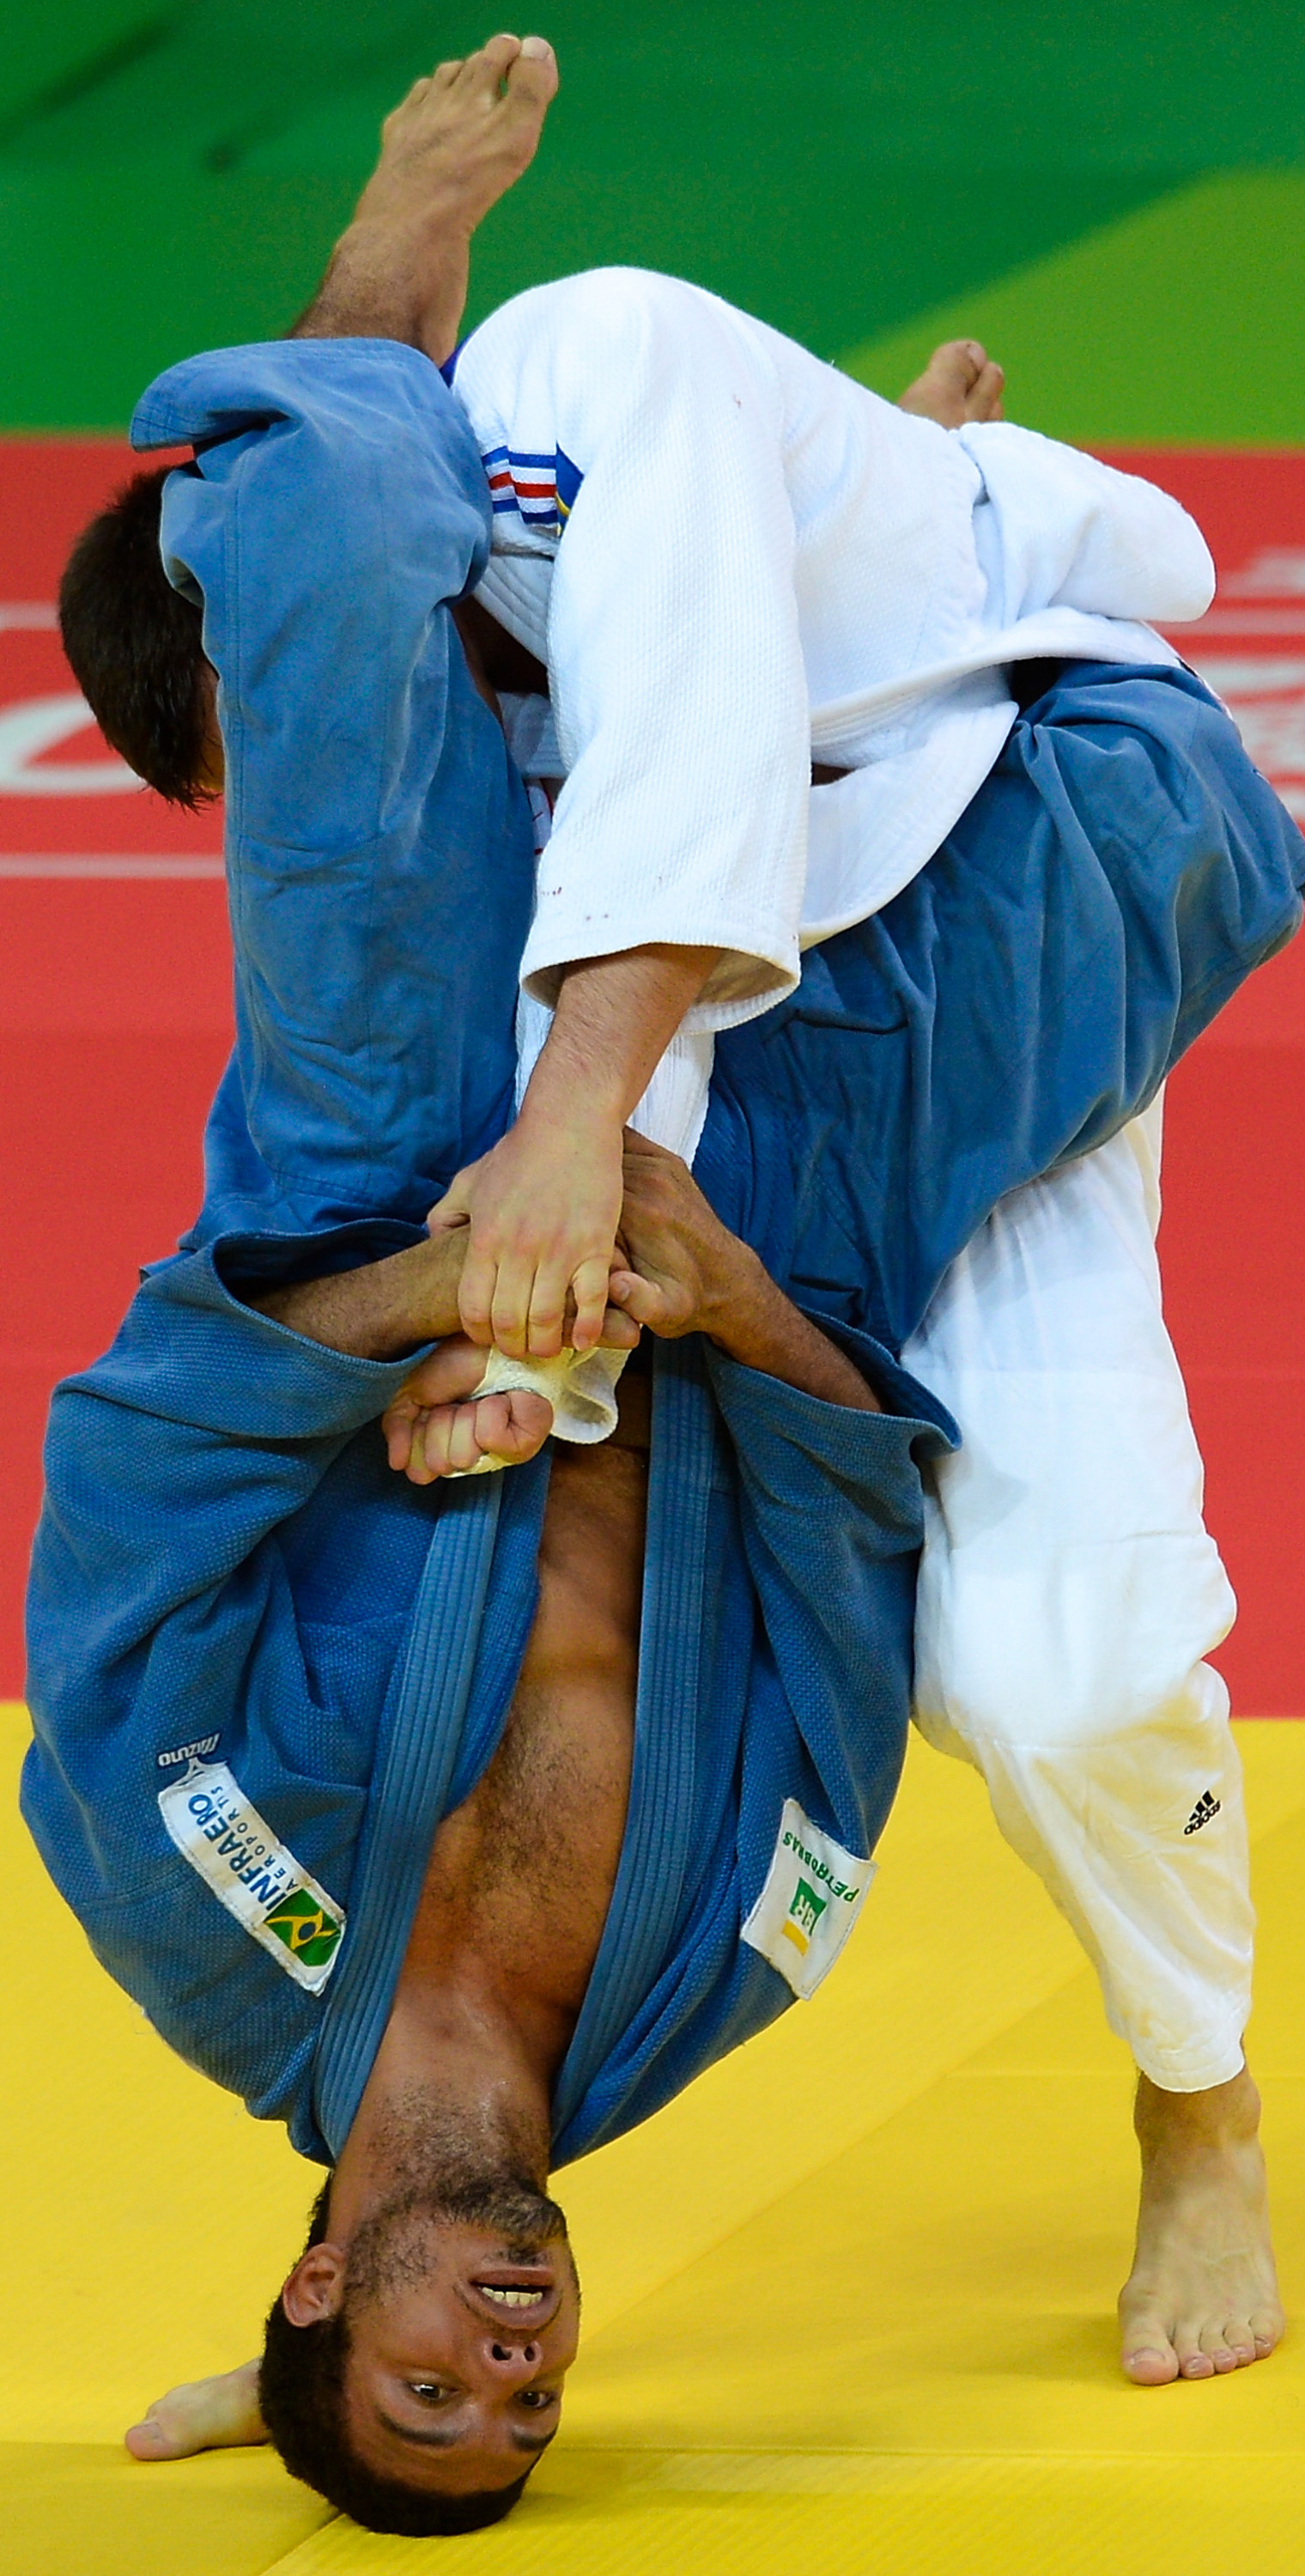 RIO DE JANEIRO, BRAZIL - MARCH 09: Nicolas Chilard (white) of France fights with Igor Pereira of Brazil during the -81kg category men bronze medal at the International Judo Tournament - Aquece Rio Test Event for the Rio 2016 Olympics at the Olympic Park on March 9, 2016 in Rio de Janeiro, Brazil. (Photo by Buda Mendes/Getty Images)